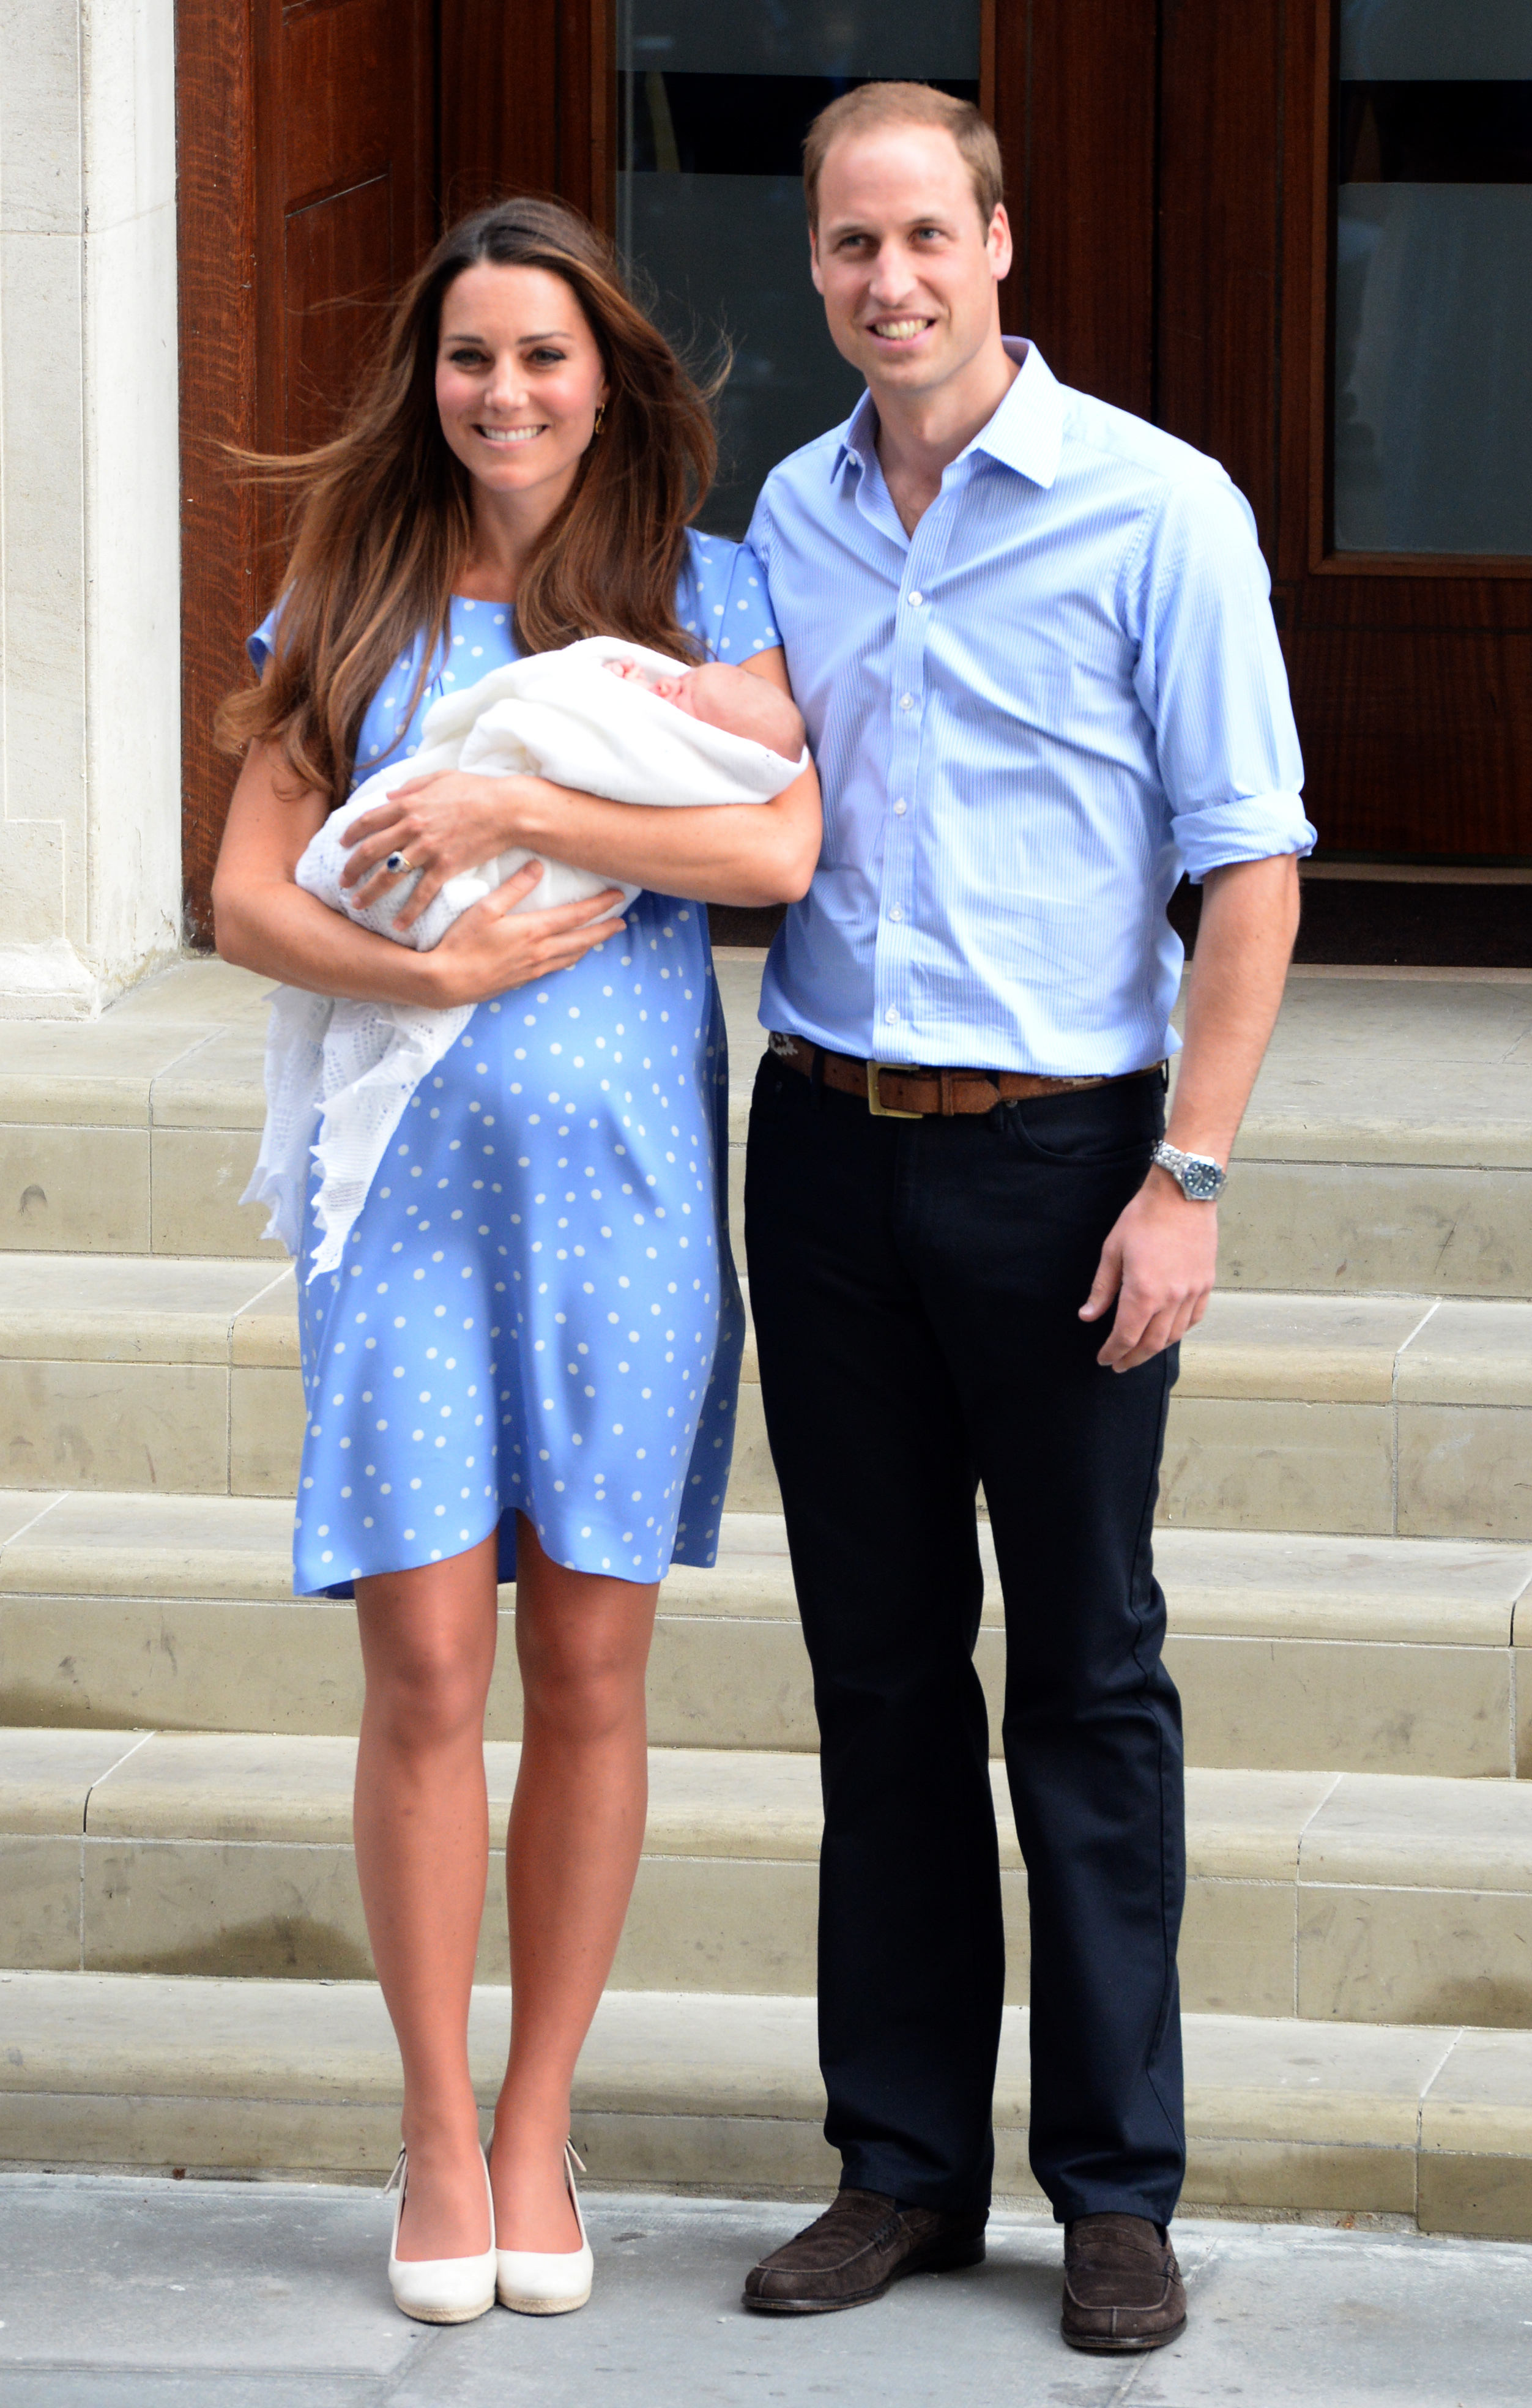 <p>An heir is born! <a href="https://www.wonderwall.com/celebrity/profiles/overview/prince-william-482.article">Prince William</a> and <a href="https://www.wonderwall.com/celebrity/profiles/overview/duchess-kate-1356.article">Duchess Kate</a> introduced the world to their newborn son Prince George outside the Lindo Wing of St. Mary's Hospital in London on July 23, 2013.</p>